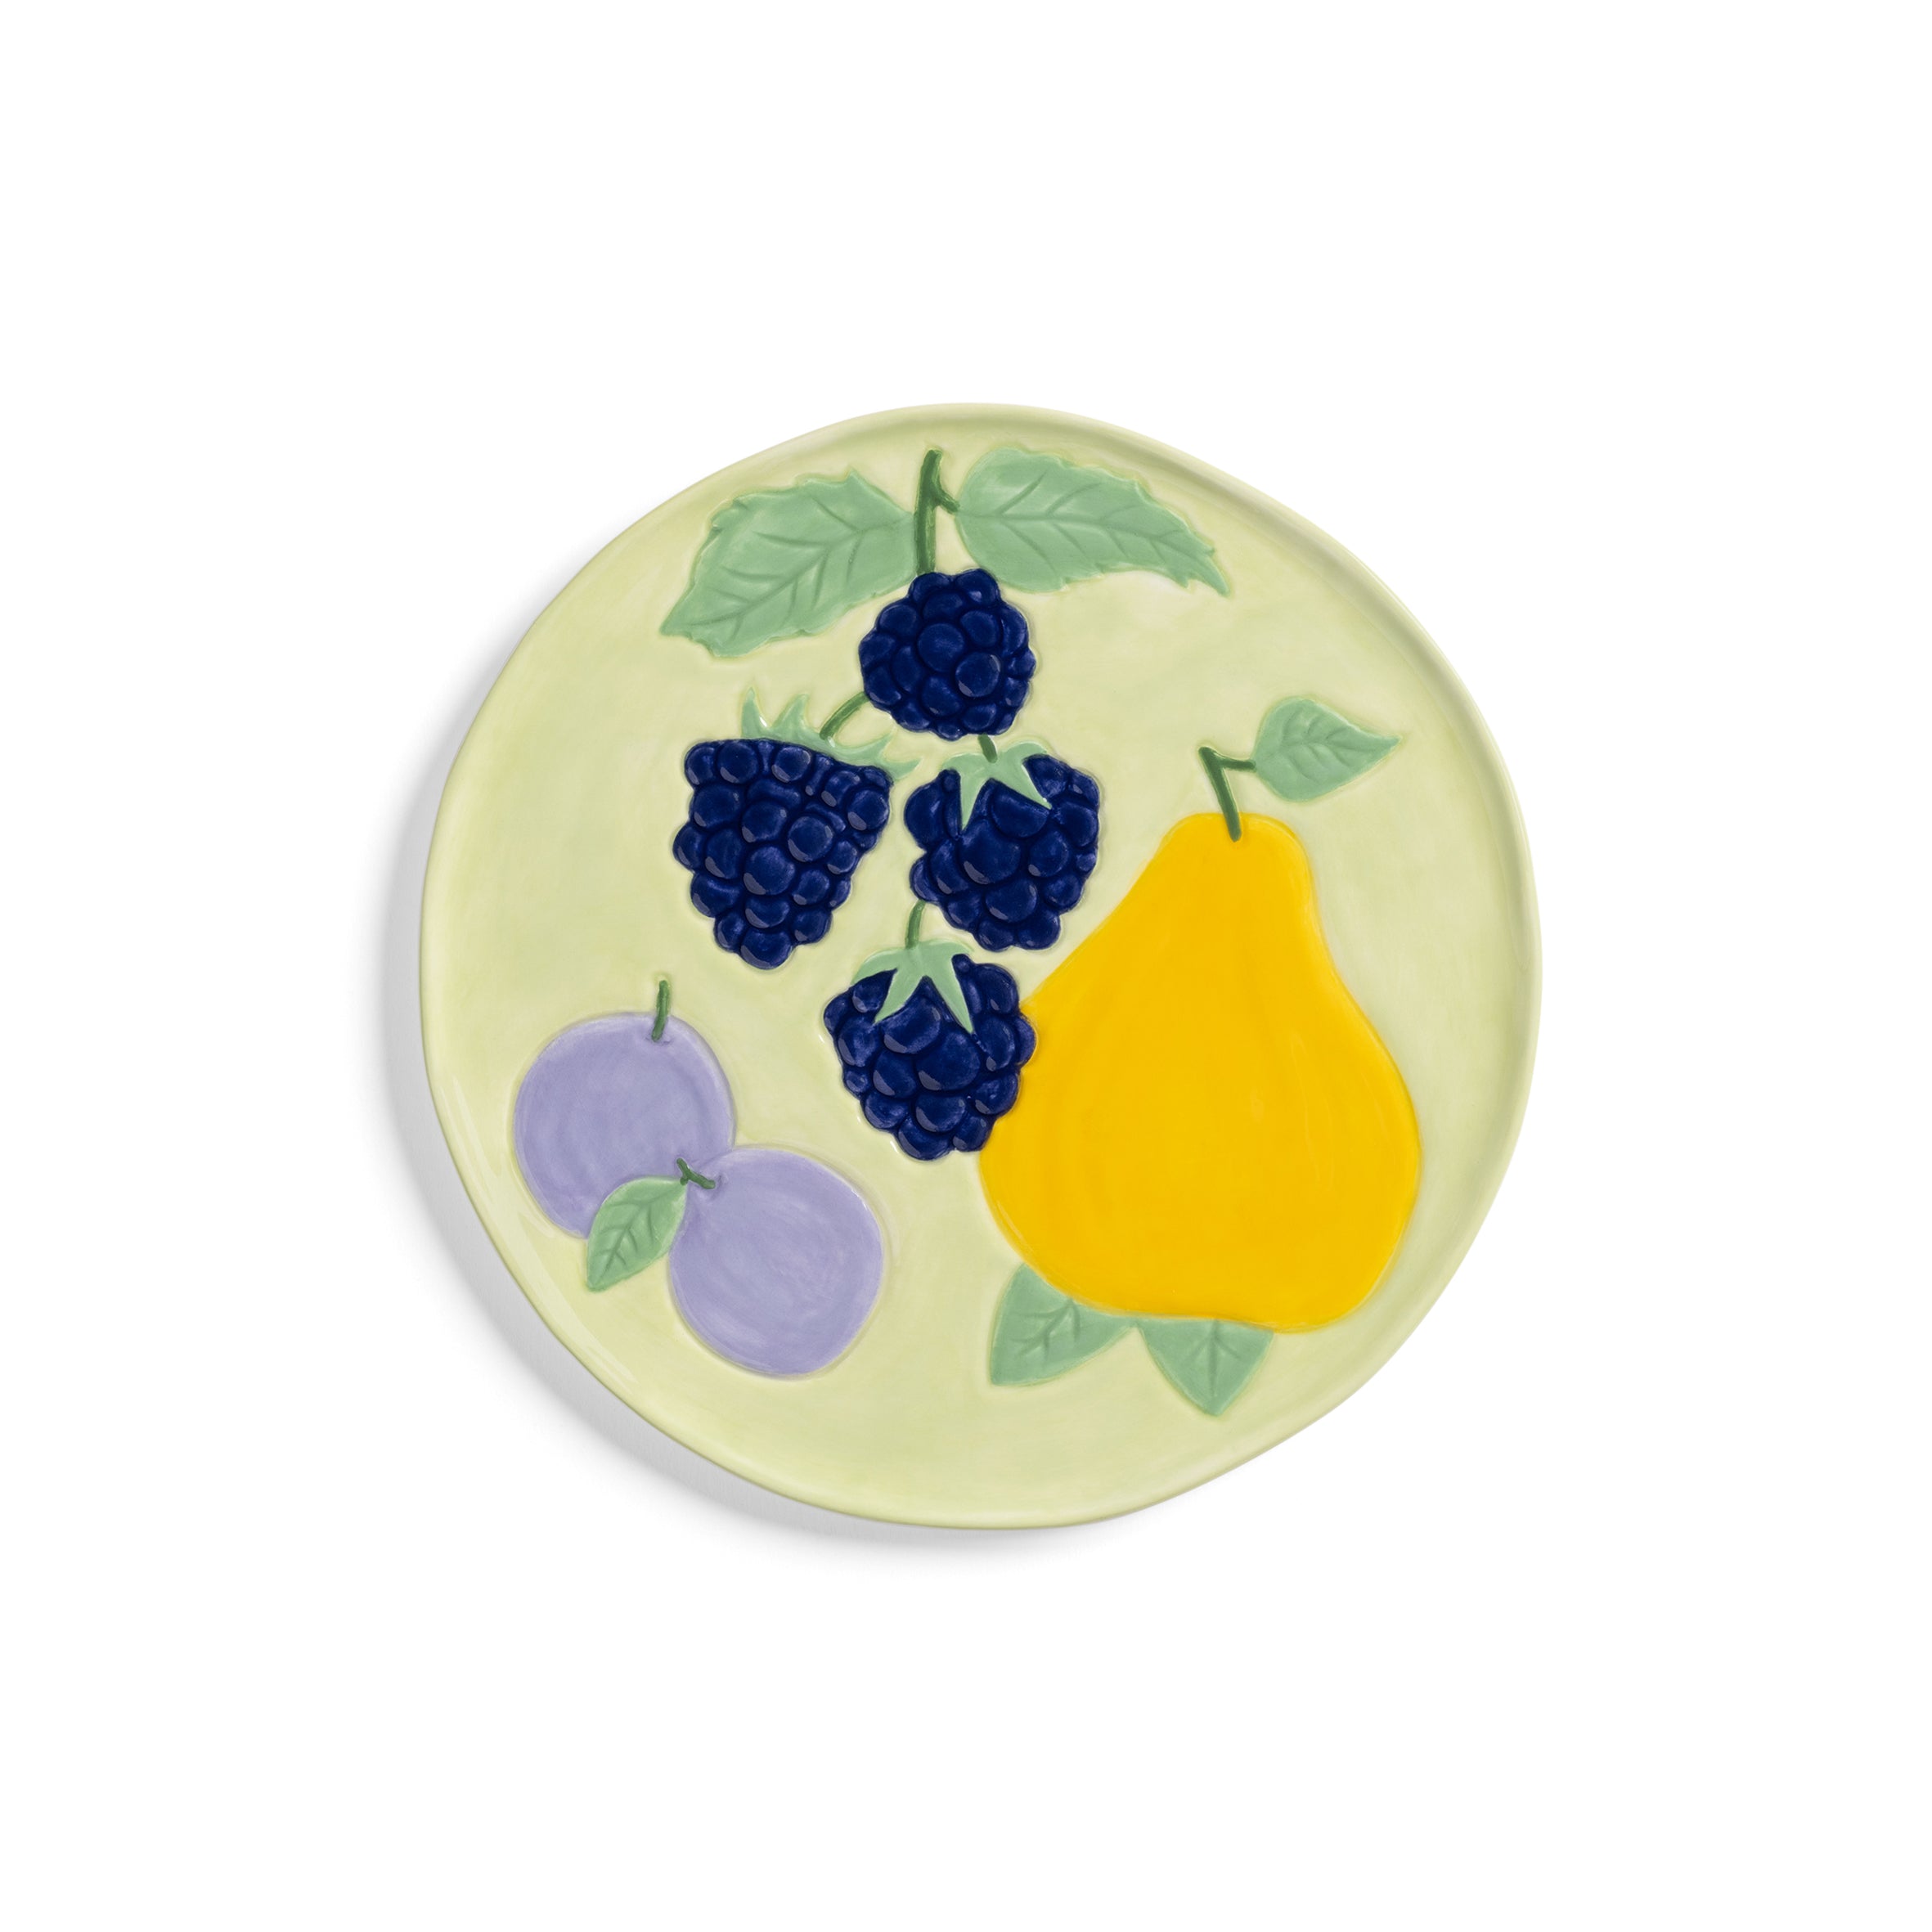 Fruity Plates | 4 Designs Available